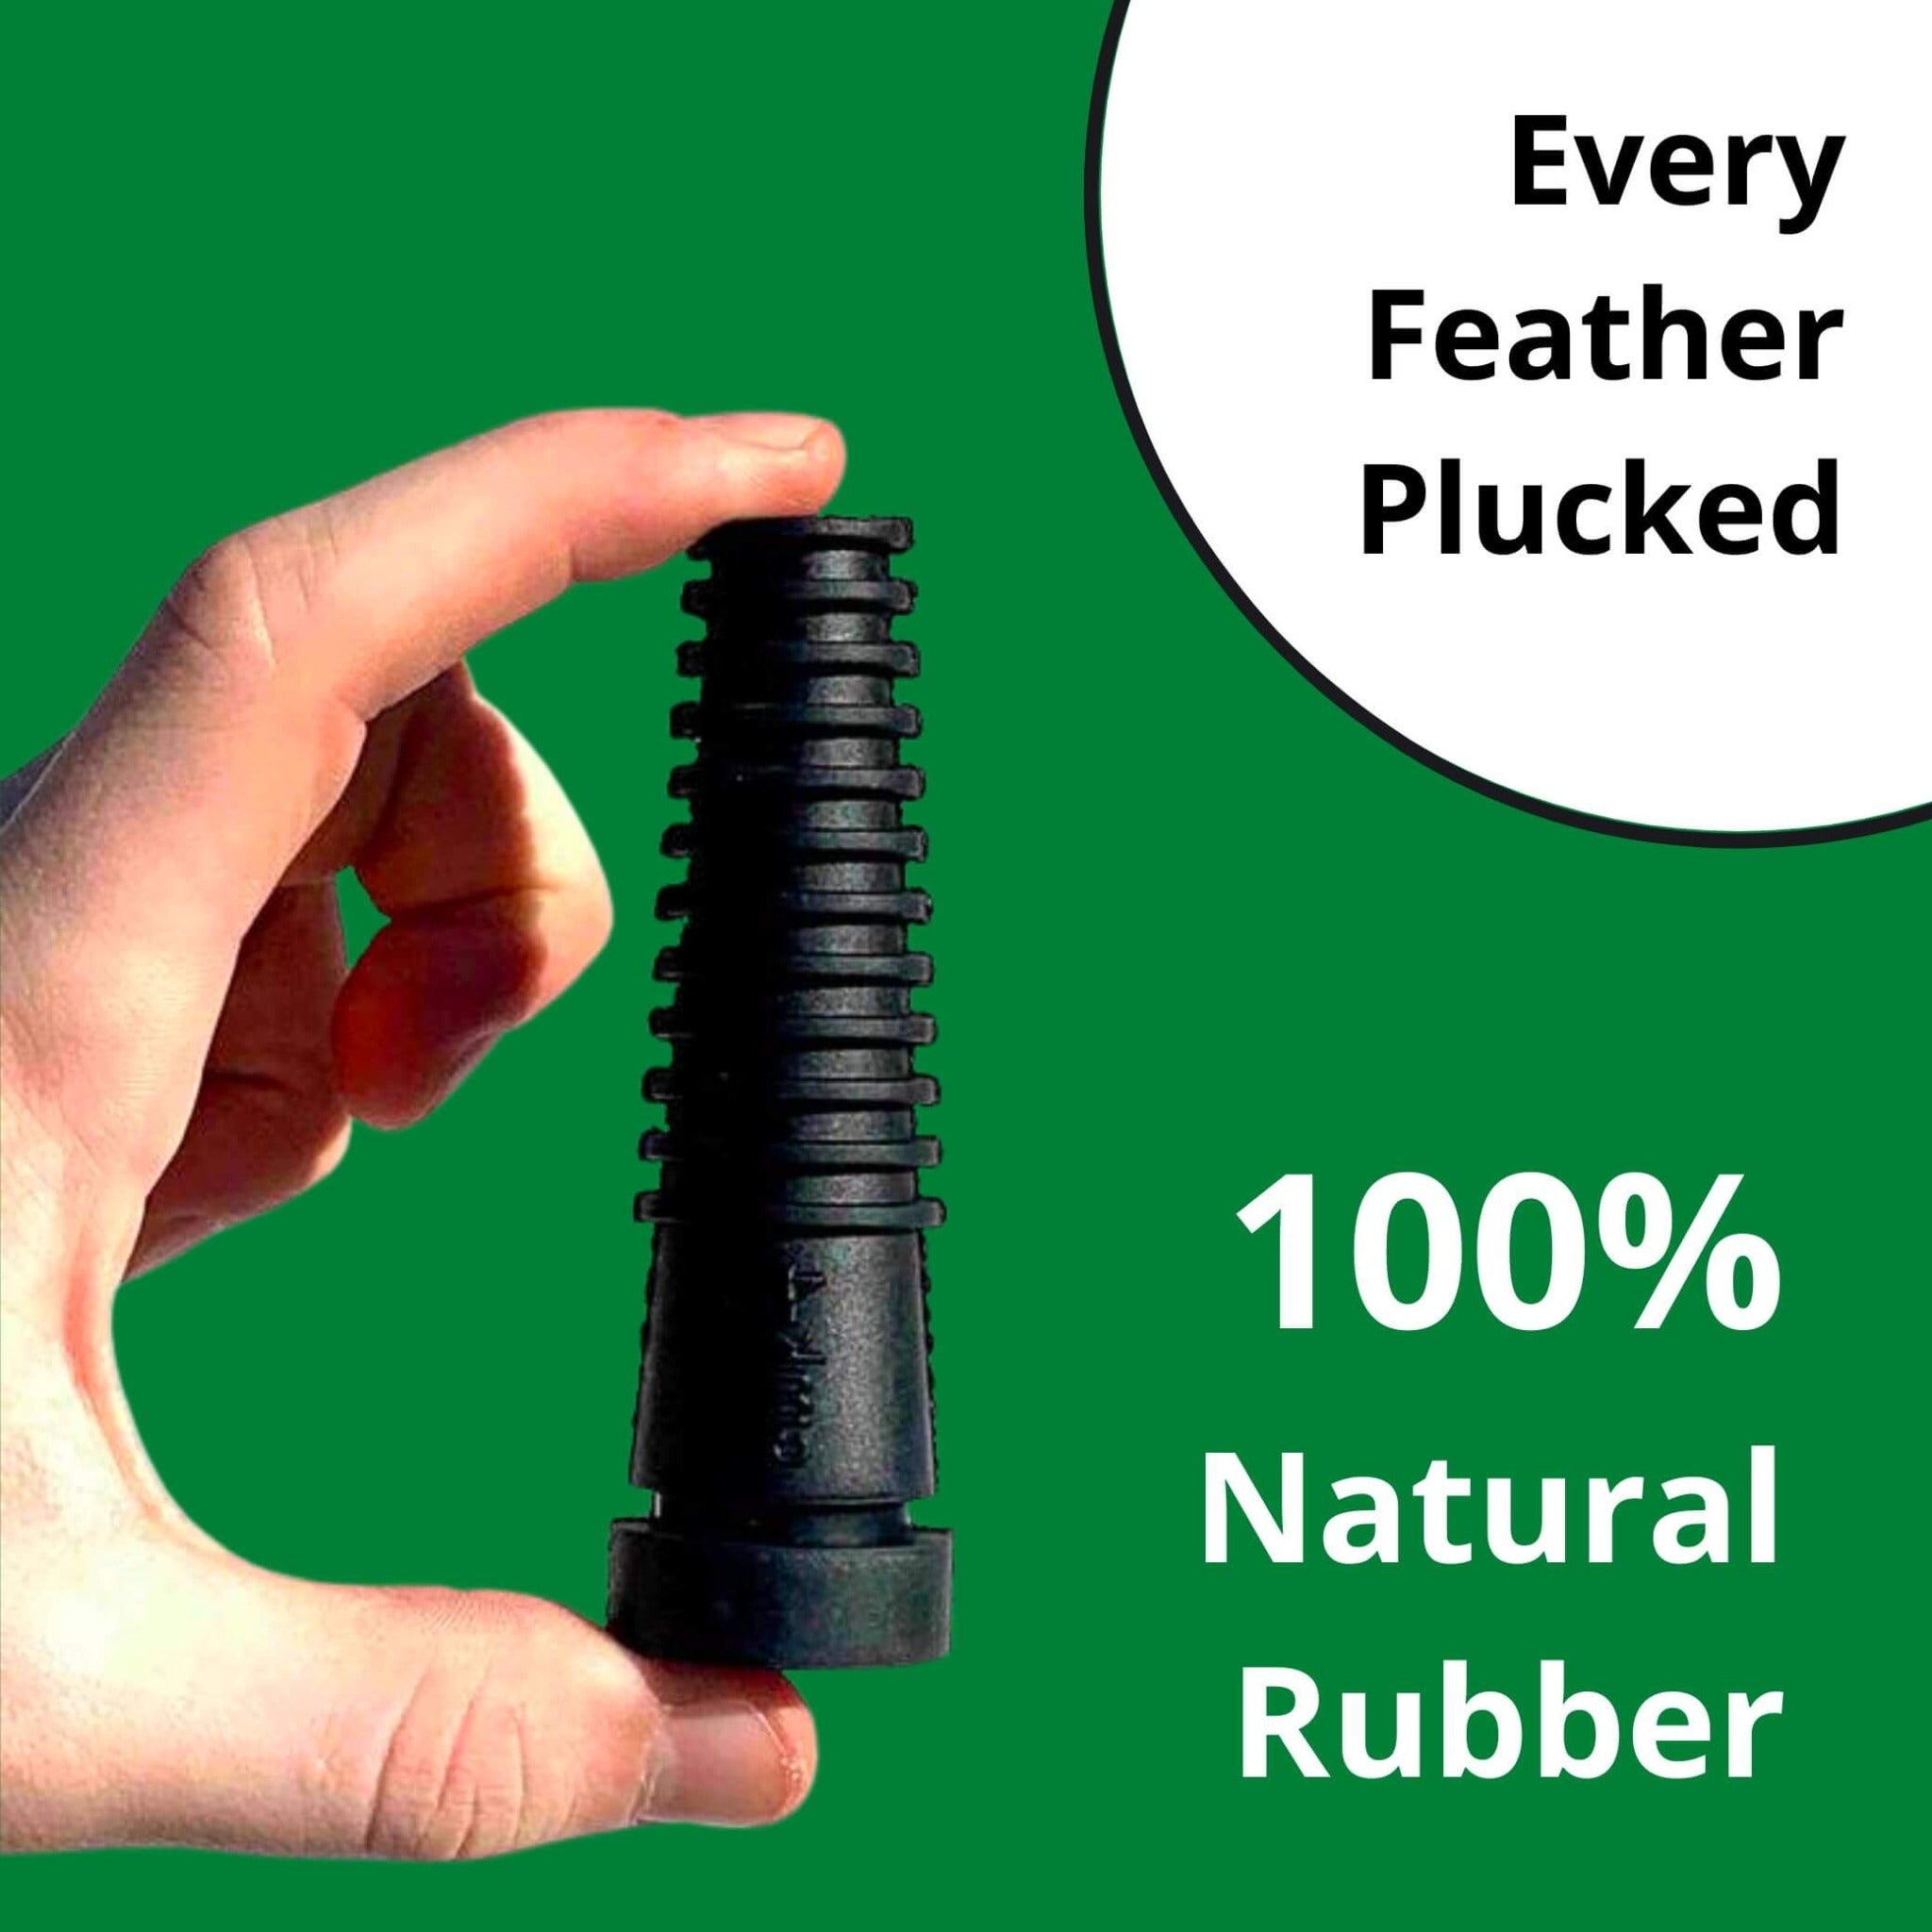 Hatching Time Cimuka. Image of plucker finger being held in hand. Text reads "every feather plucked 100% natural rubber."